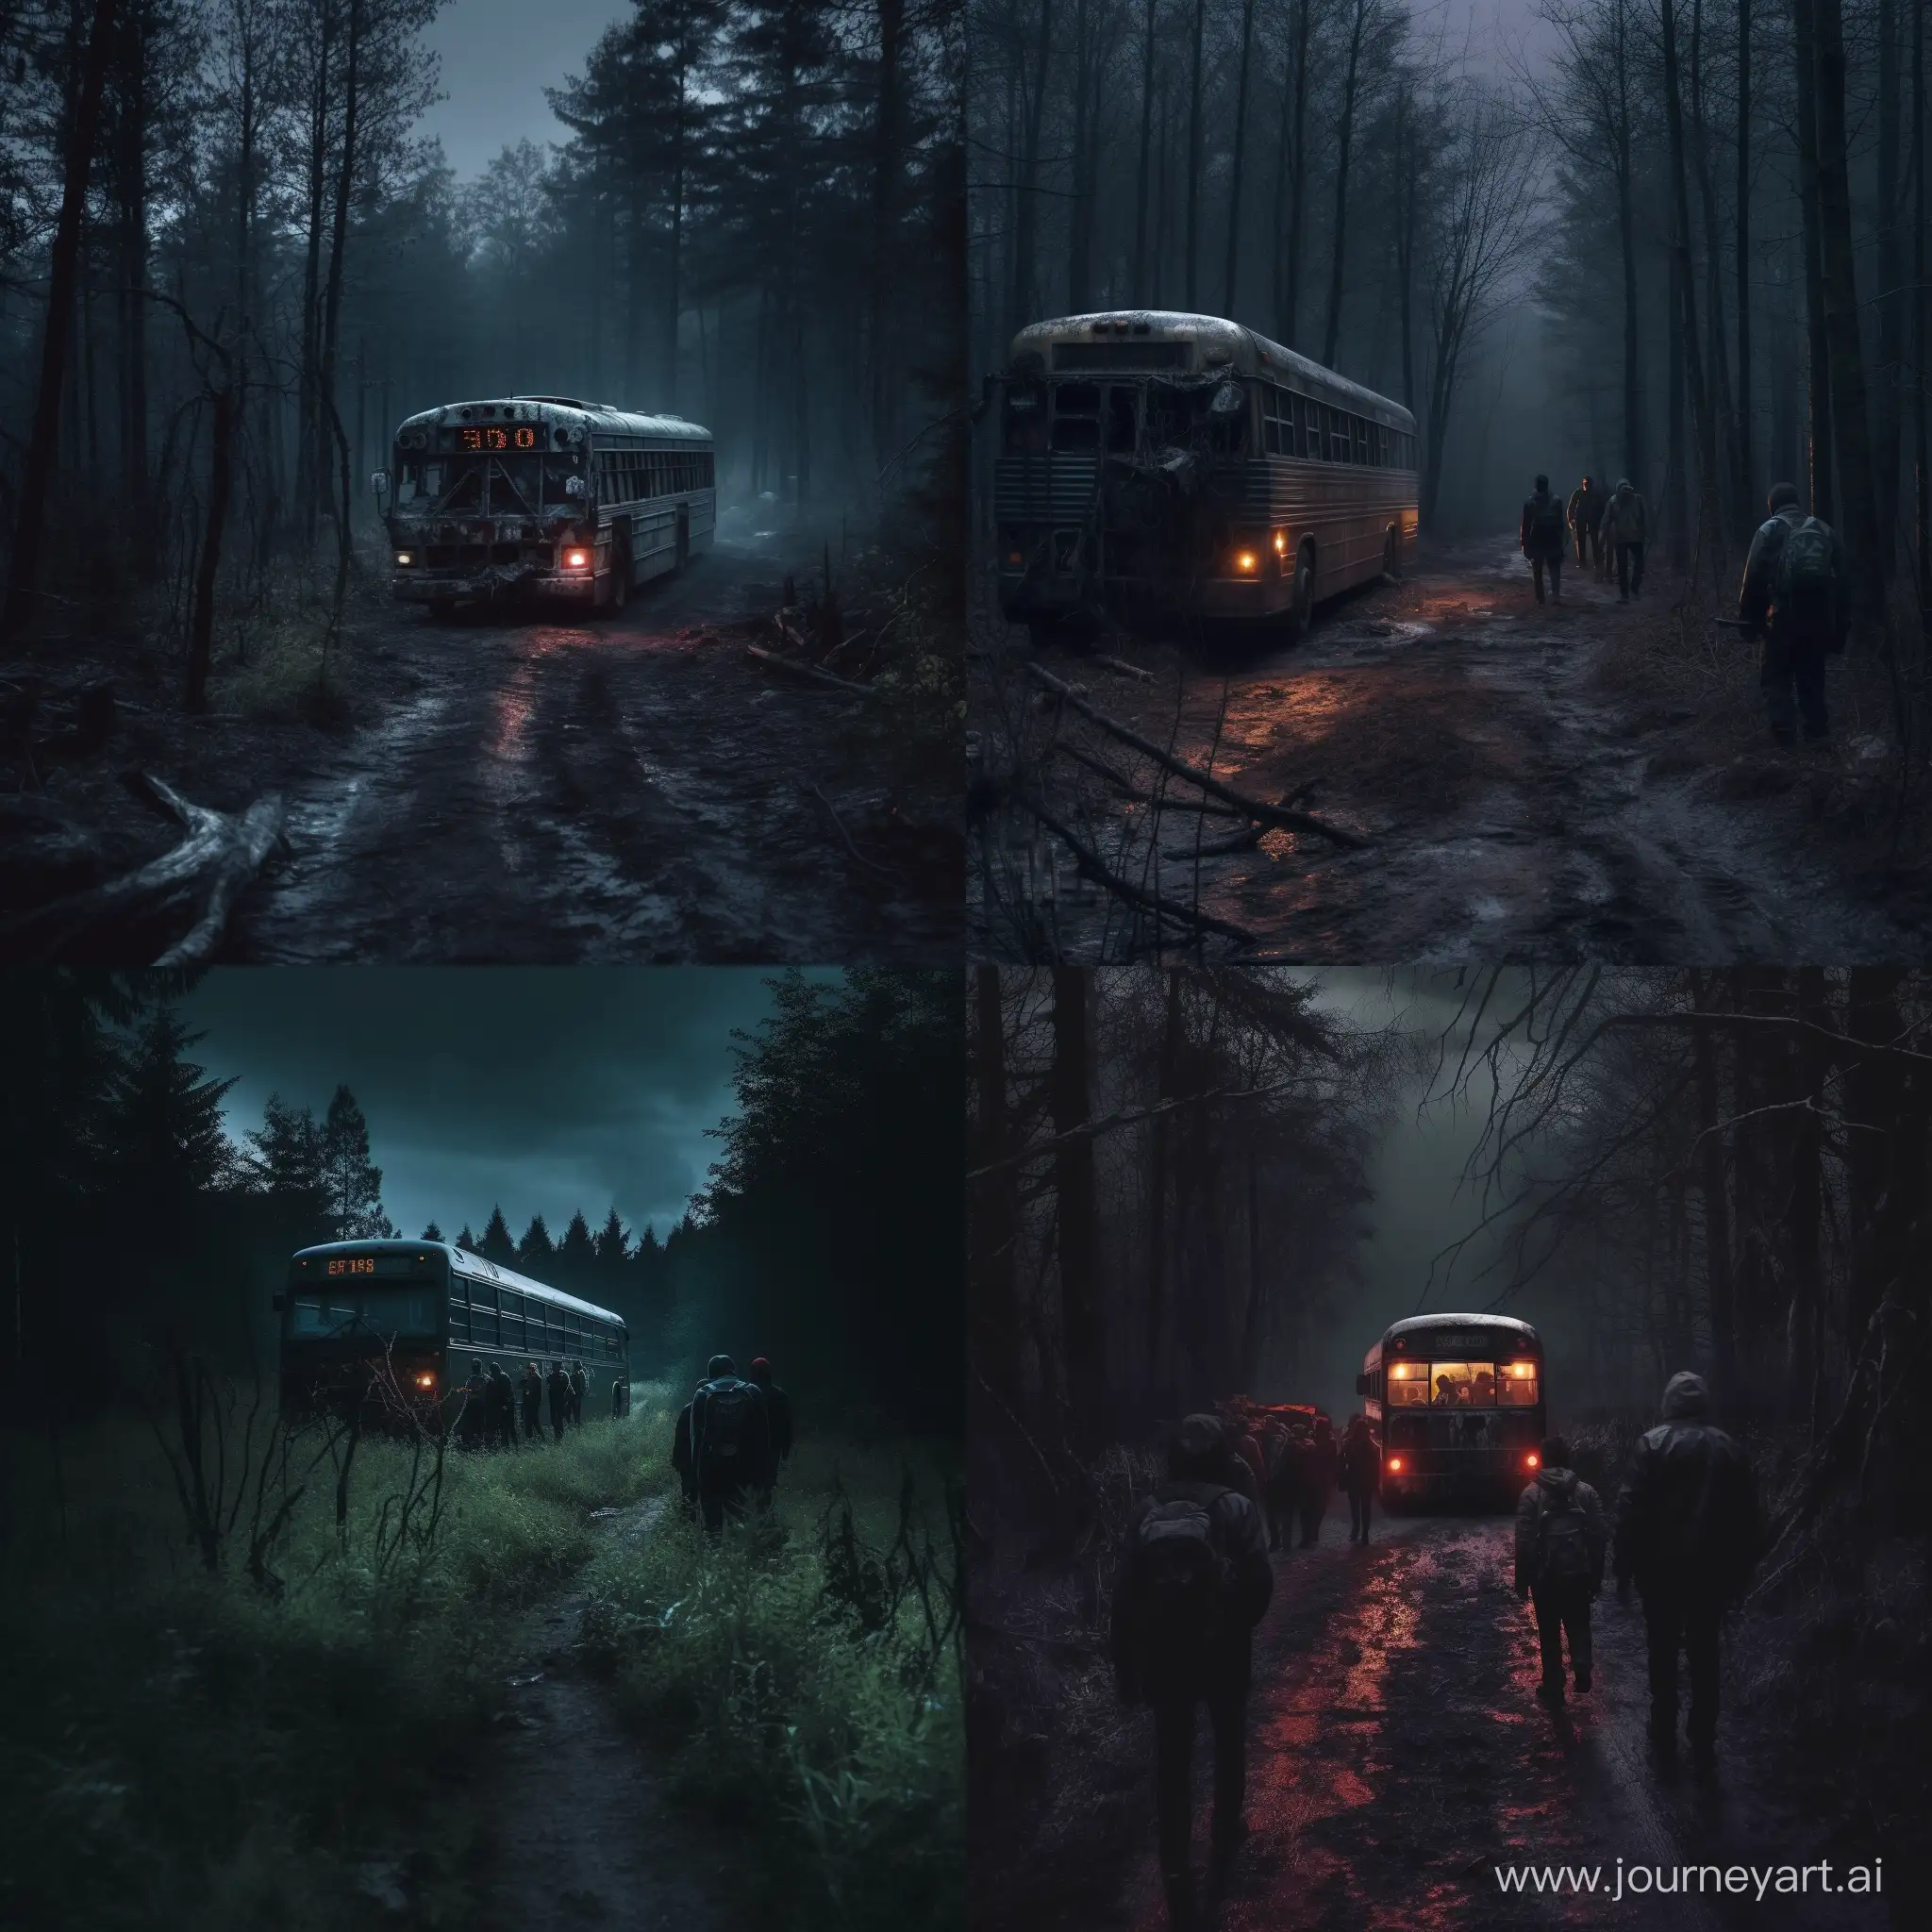 gloomy atmosphere, hyper-realism, 8K image quality, ultra detail, gloomy atmosphere, forest,horror atmosphere, darkness, bus headlights are glowing, people are walking around the bus,  Russian Abandoned bus stuck in trees and grass, headlights on, nearby people tourists, Abandoned Bus 